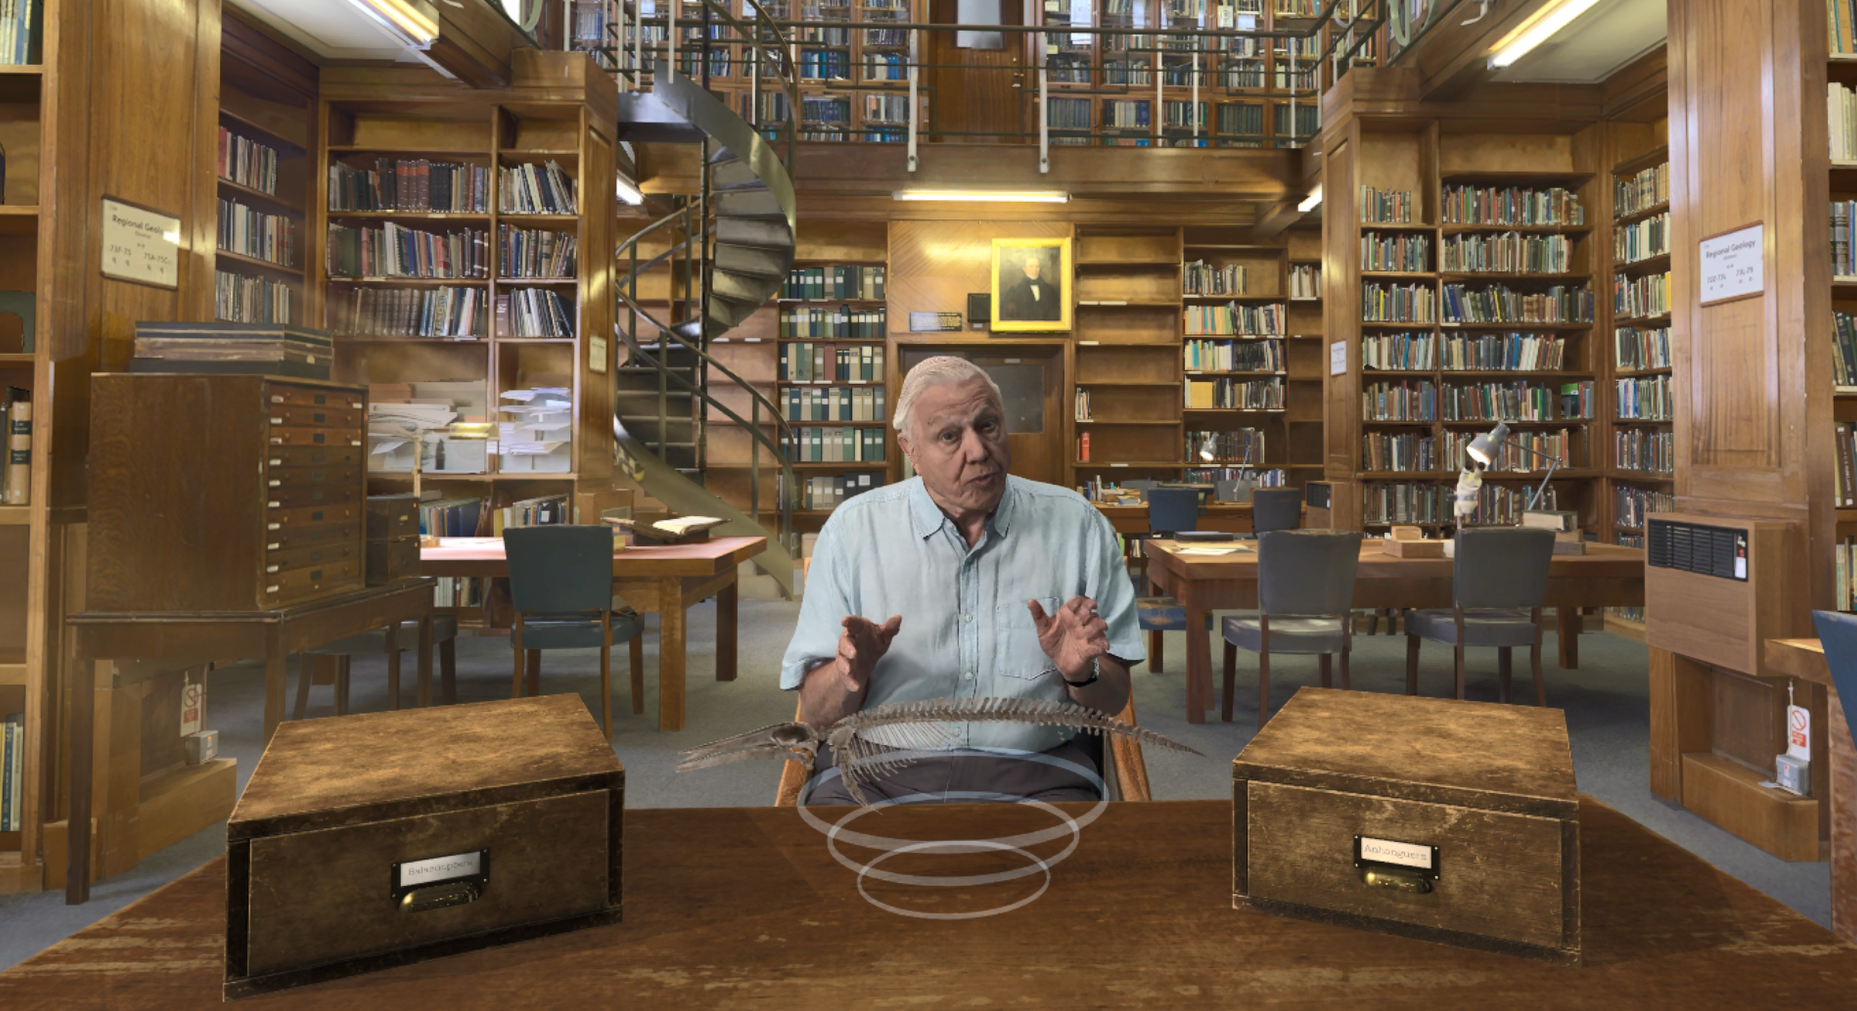  Sky’s new virtual reality experience,   Hold the World  , launched in June, offering the unique opportunity of a one-on-one with the world’s foremost natural history broadcaster, Sir David Attenborough. The ground-breaking interactive experience is 